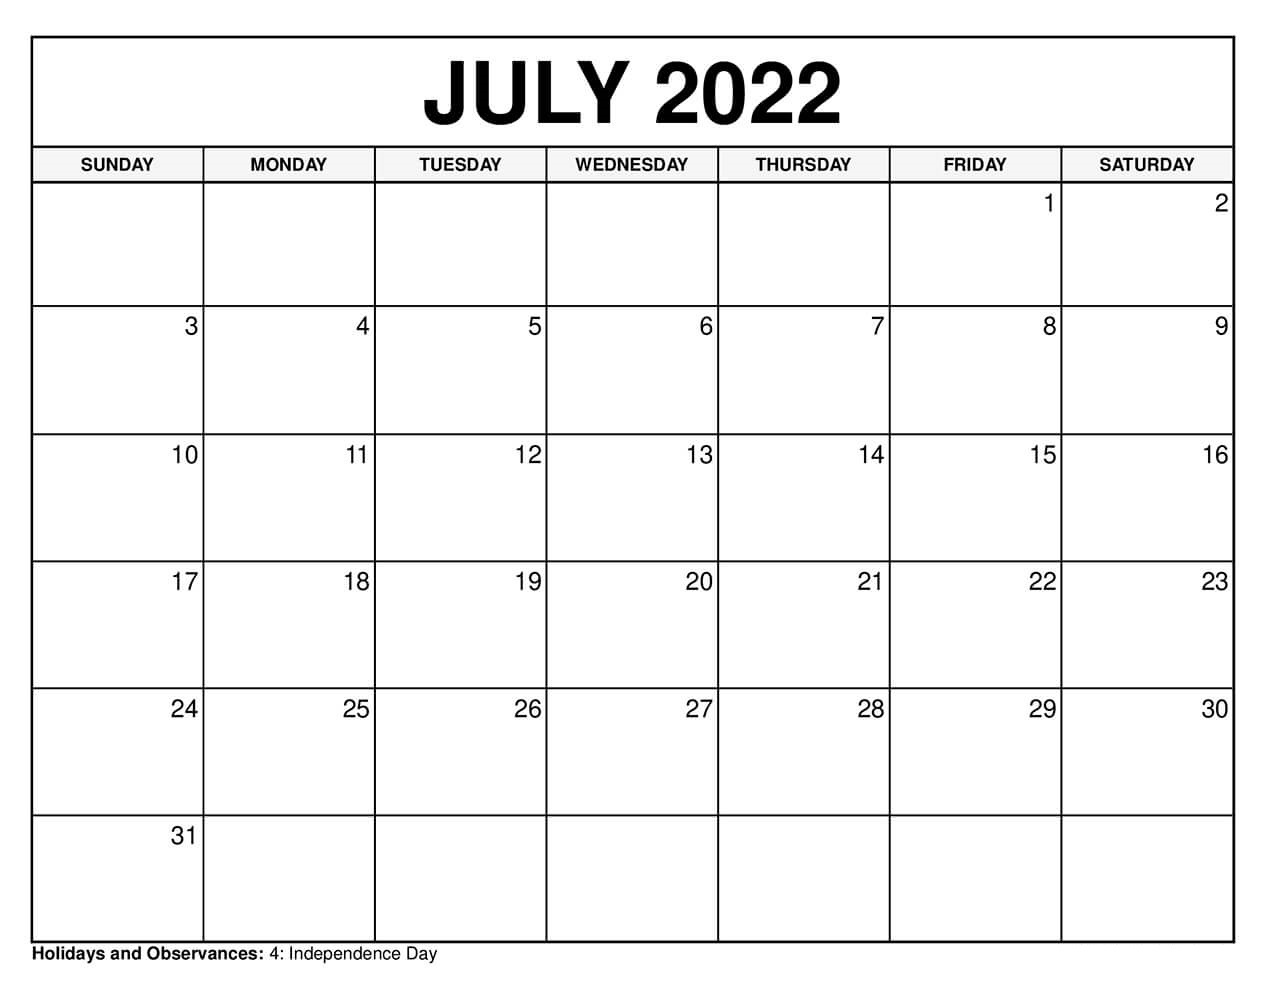 July 2022 Calendar With Holidays